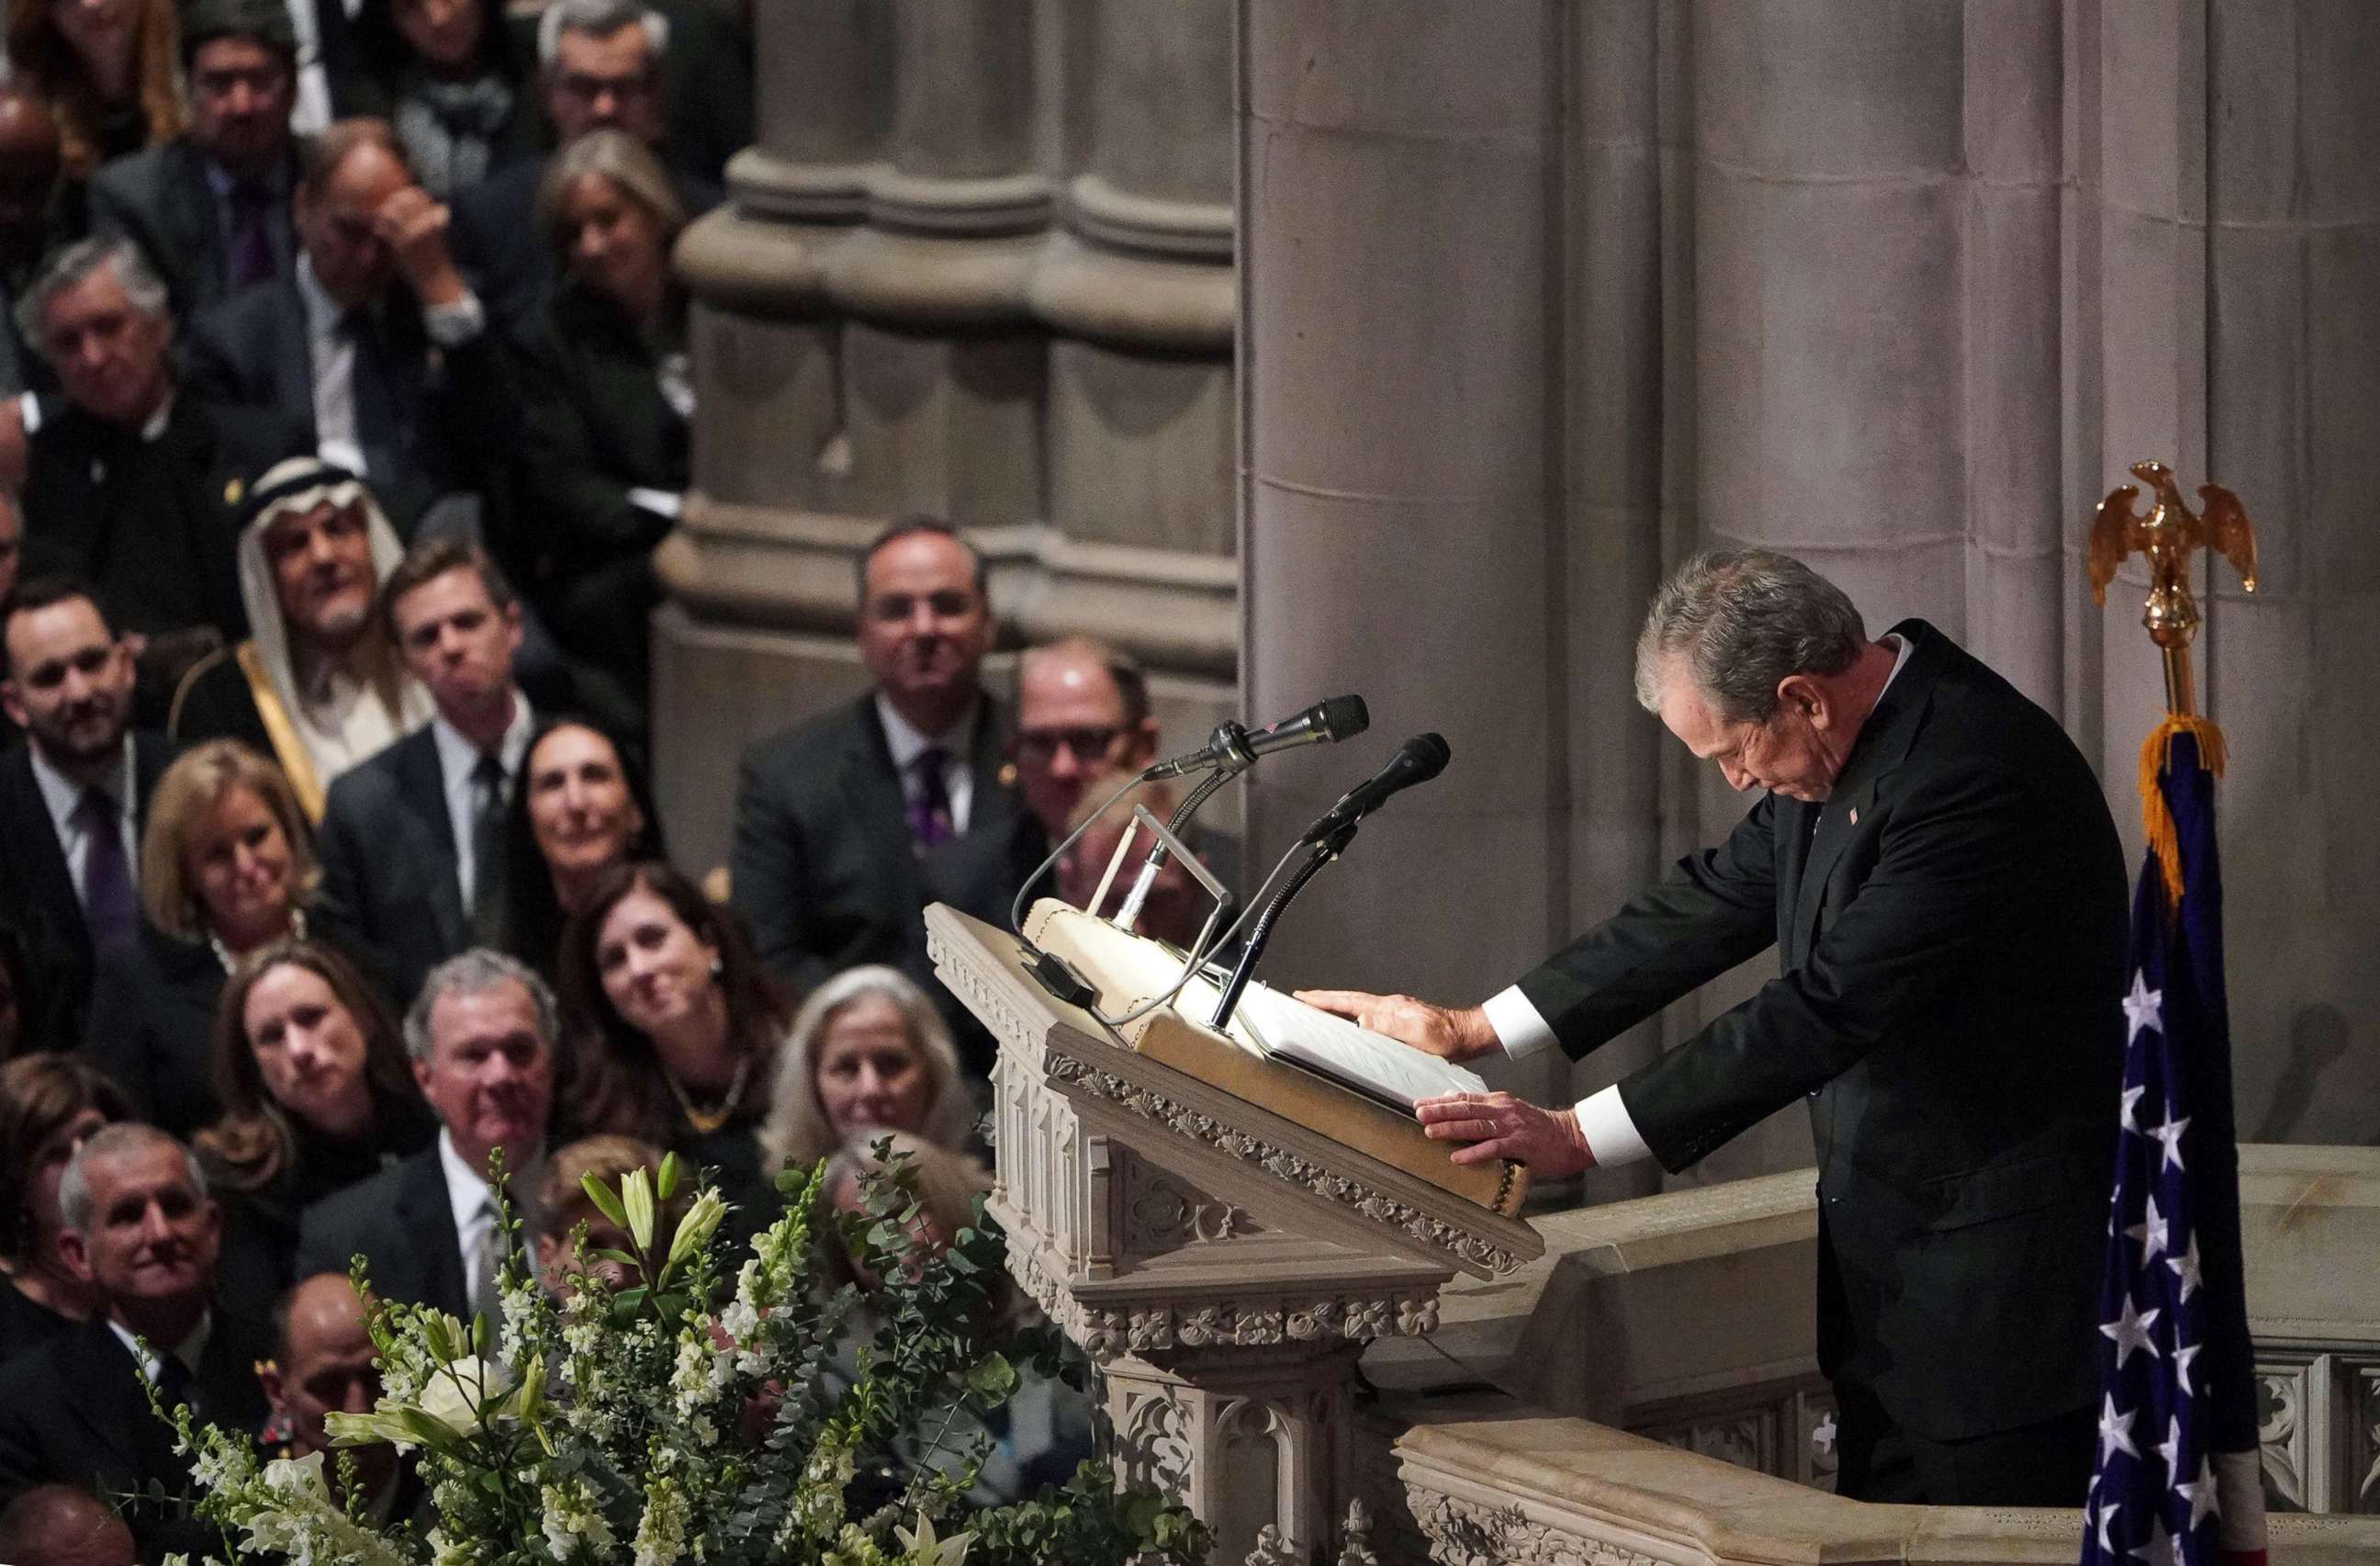 PHOTO: Former President George W. Bush speaks during the funeral service for his father, former President George H. W. Bush at the National Cathedral in Washington, D.C., Dec. 5, 2018.